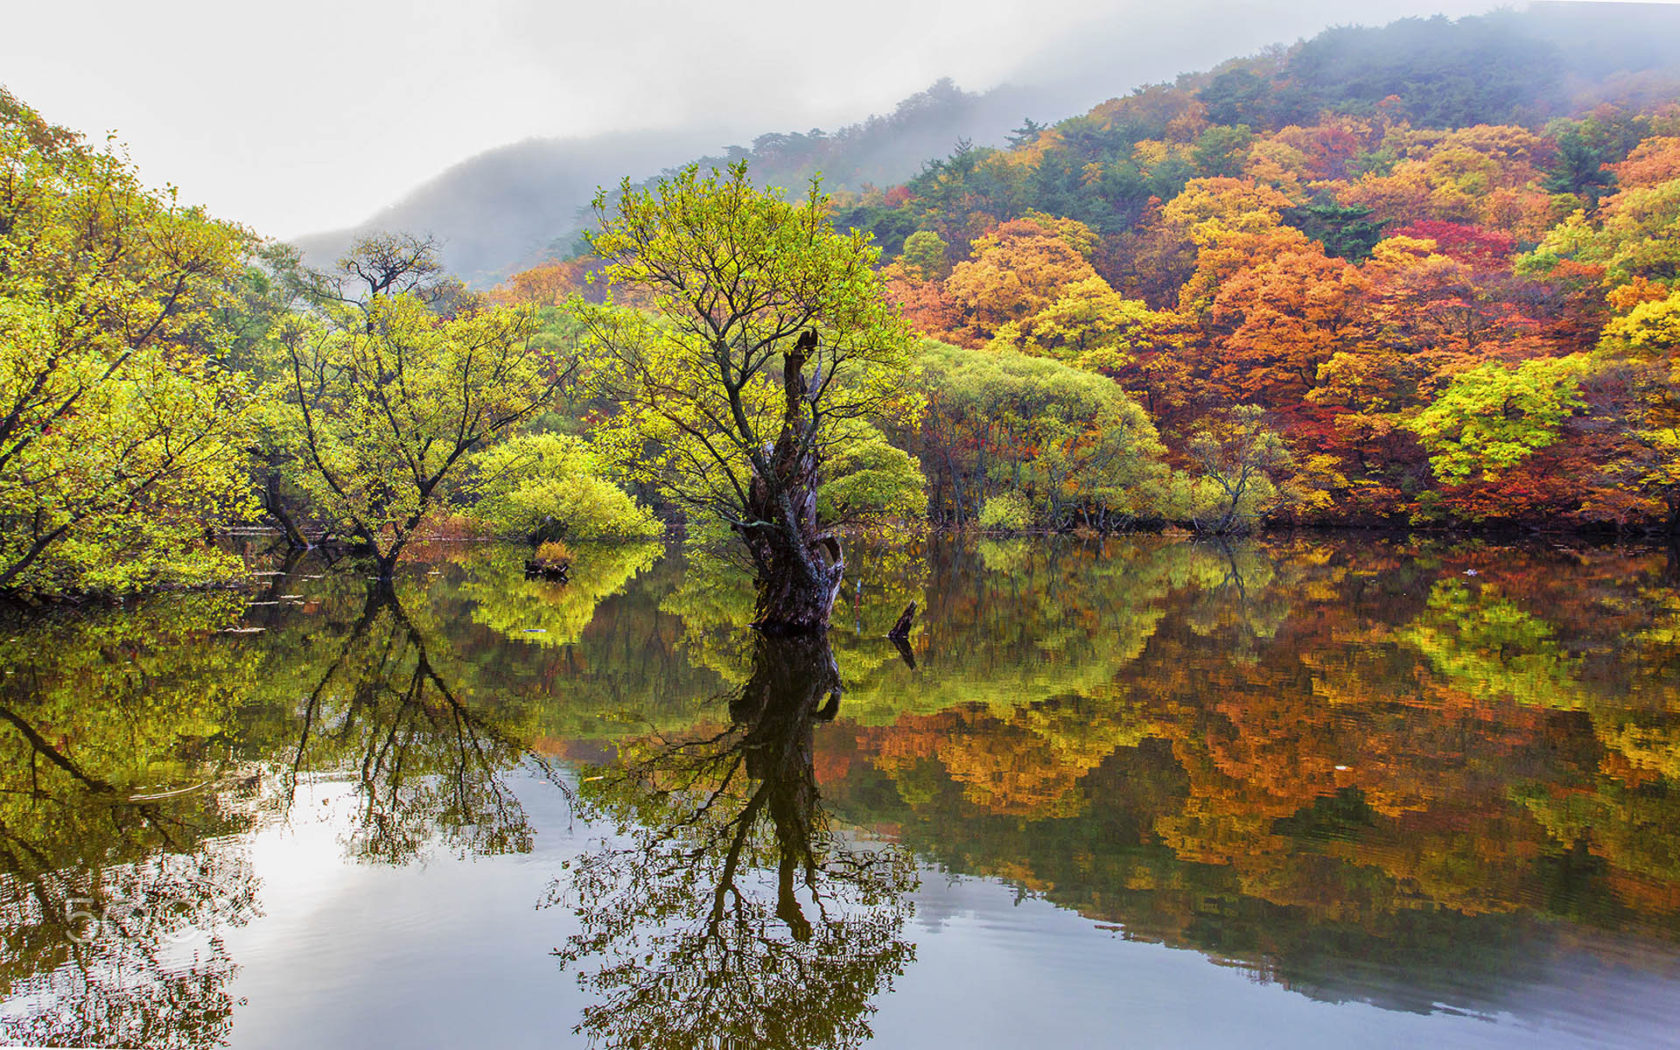 Autumn Trees With Autumn Leaves Reflection In Water Cheongsong South Korea Landscape Photography Ultra HD Wallpaper For Desktop Mobile Phones Tablet And Laptops, Wallpaper13.com